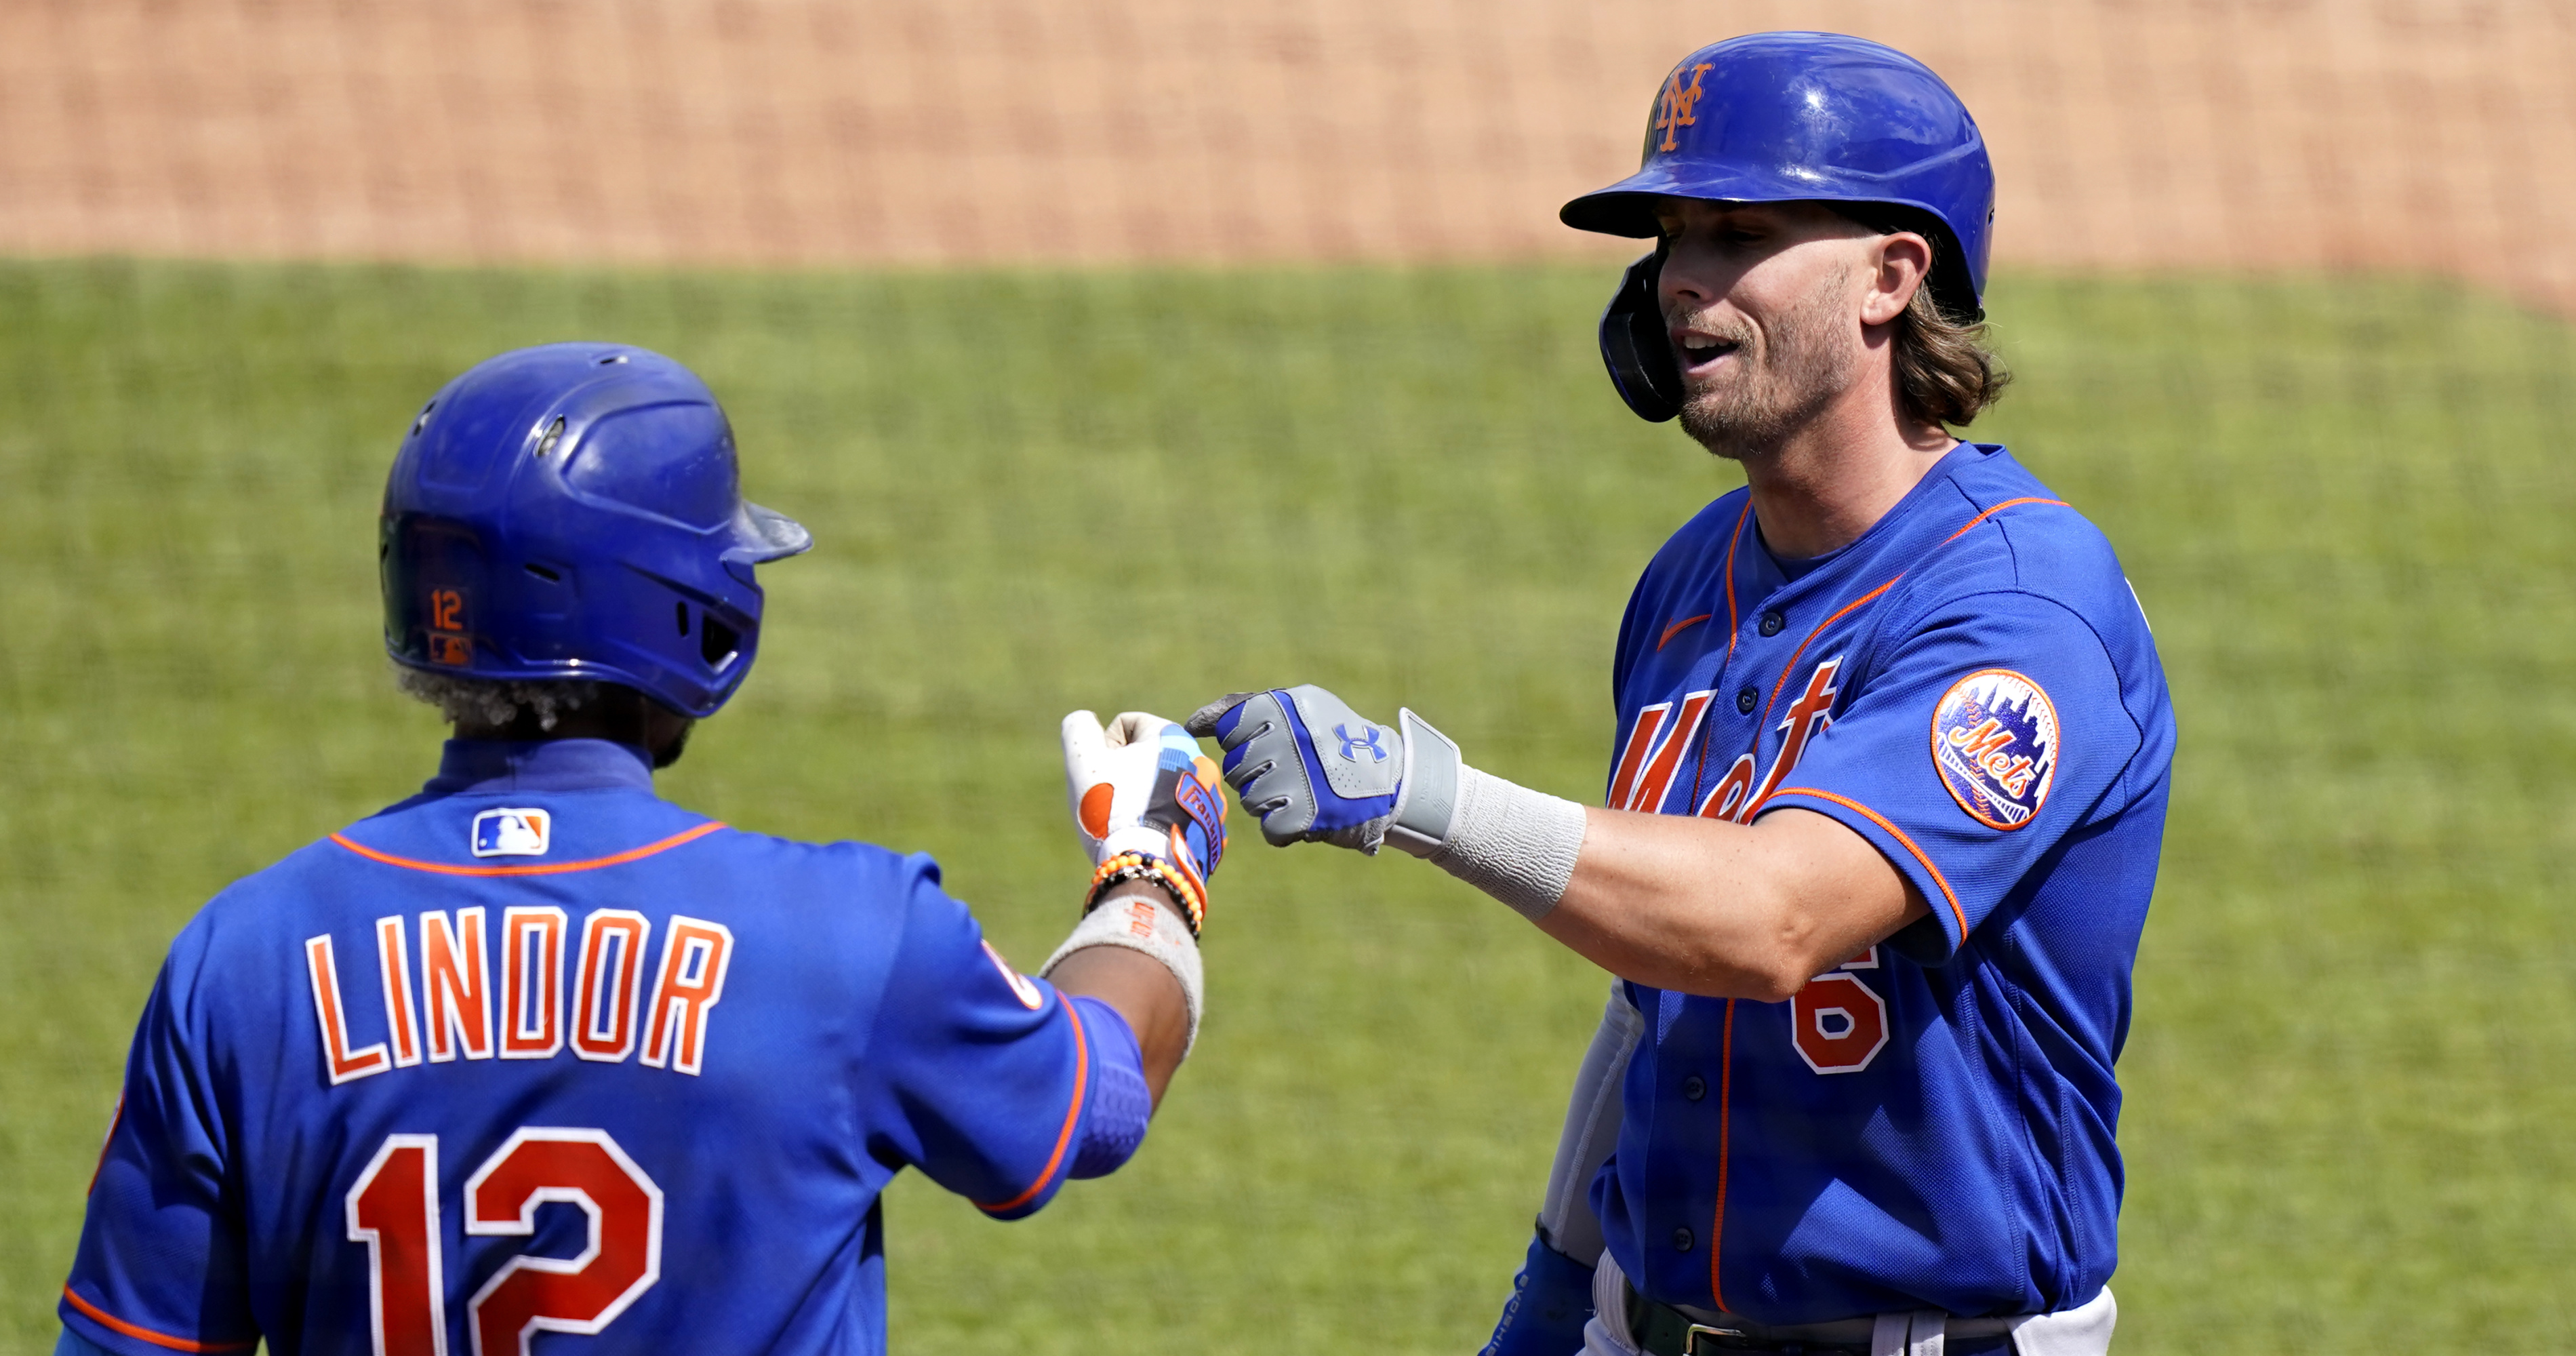 Report: Mets Reach an Agreement With Jeff McNeil